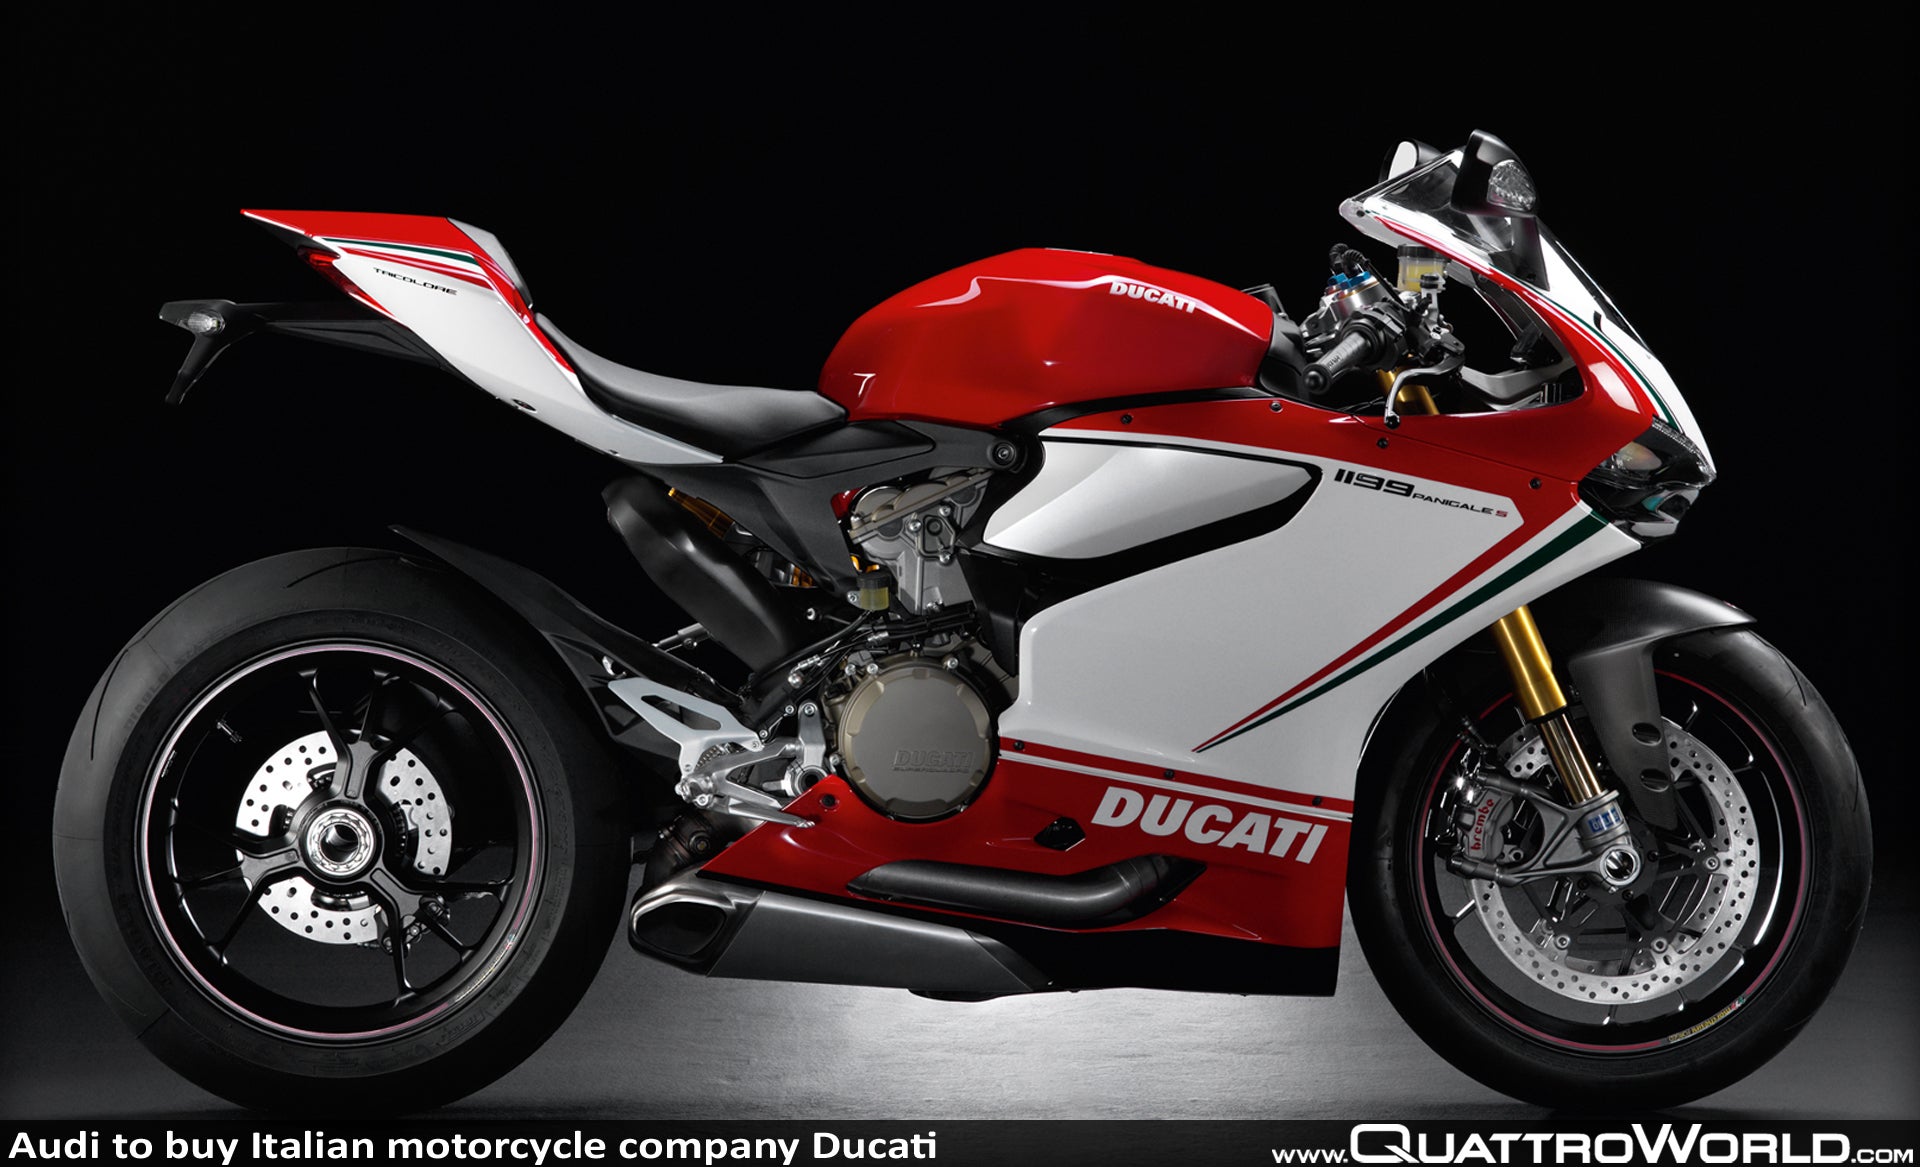  agrees to purchase Italian motorcycle company Ducati  QuattroWorld